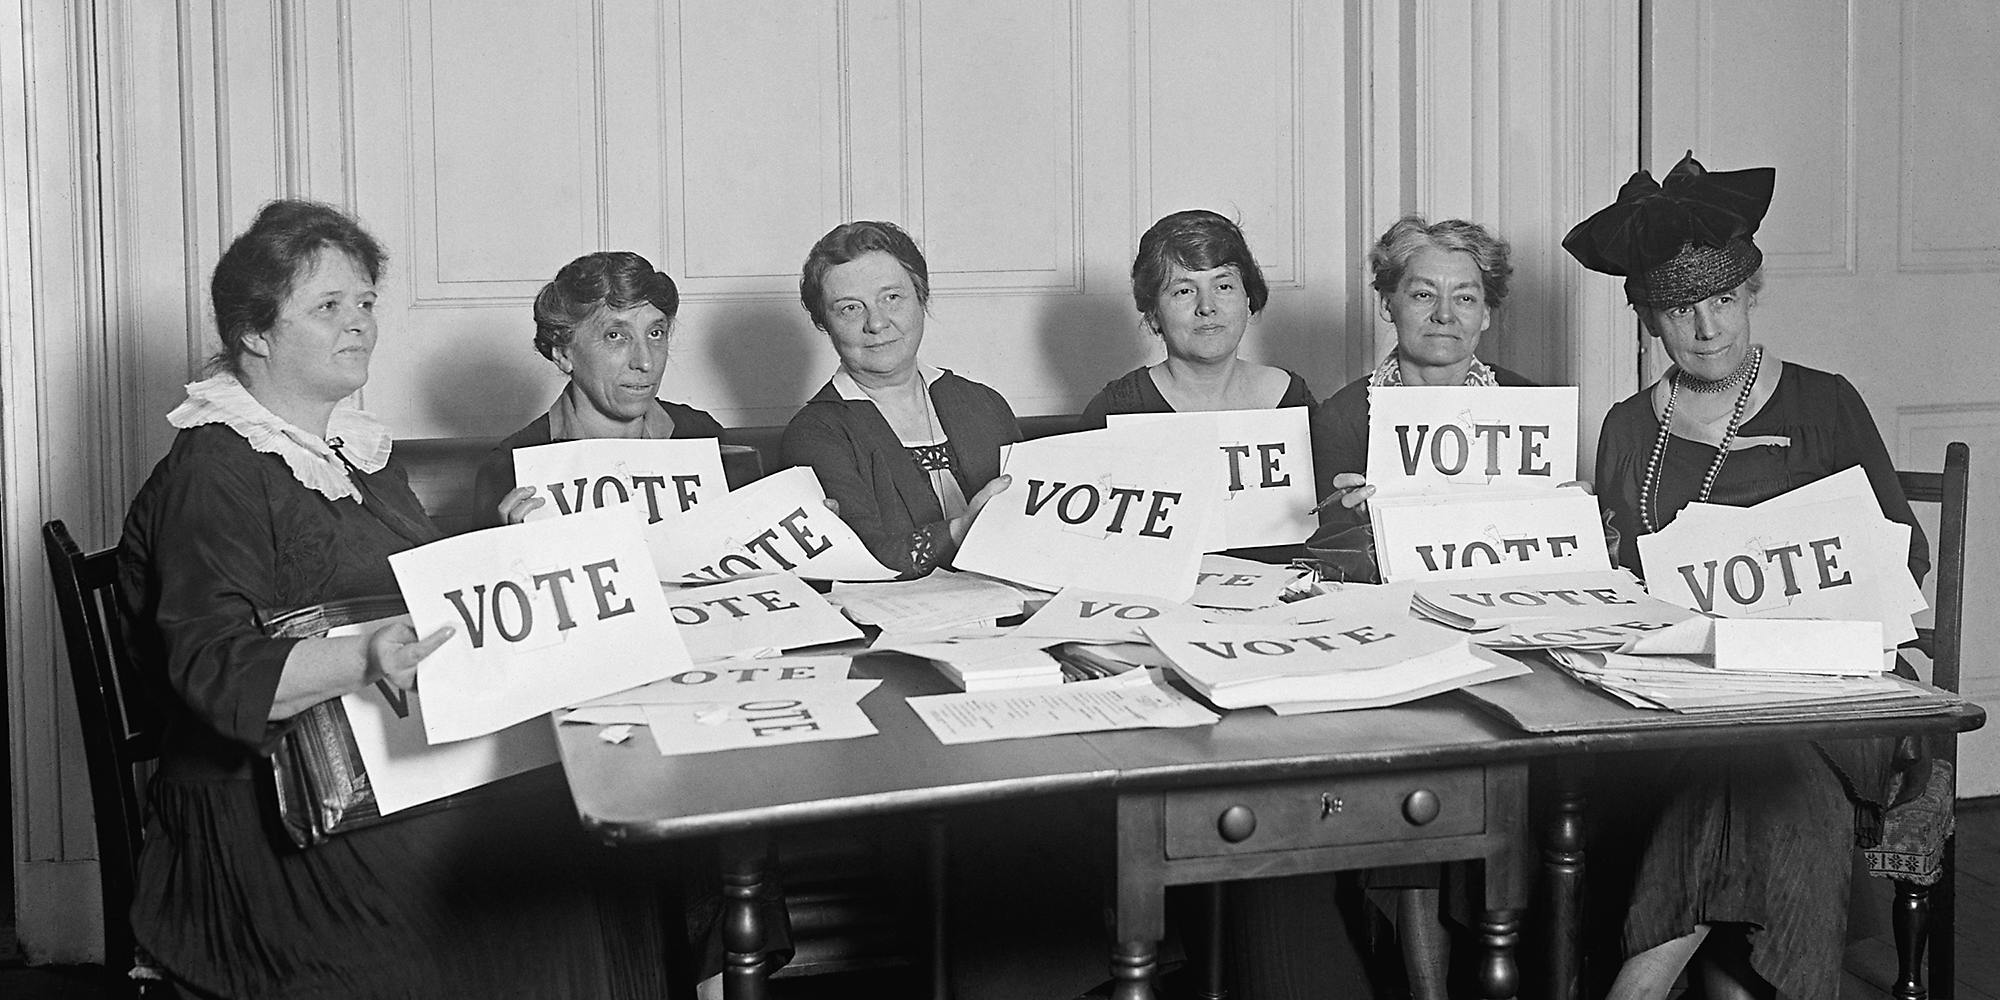 A group of women with 'Vote' signs.